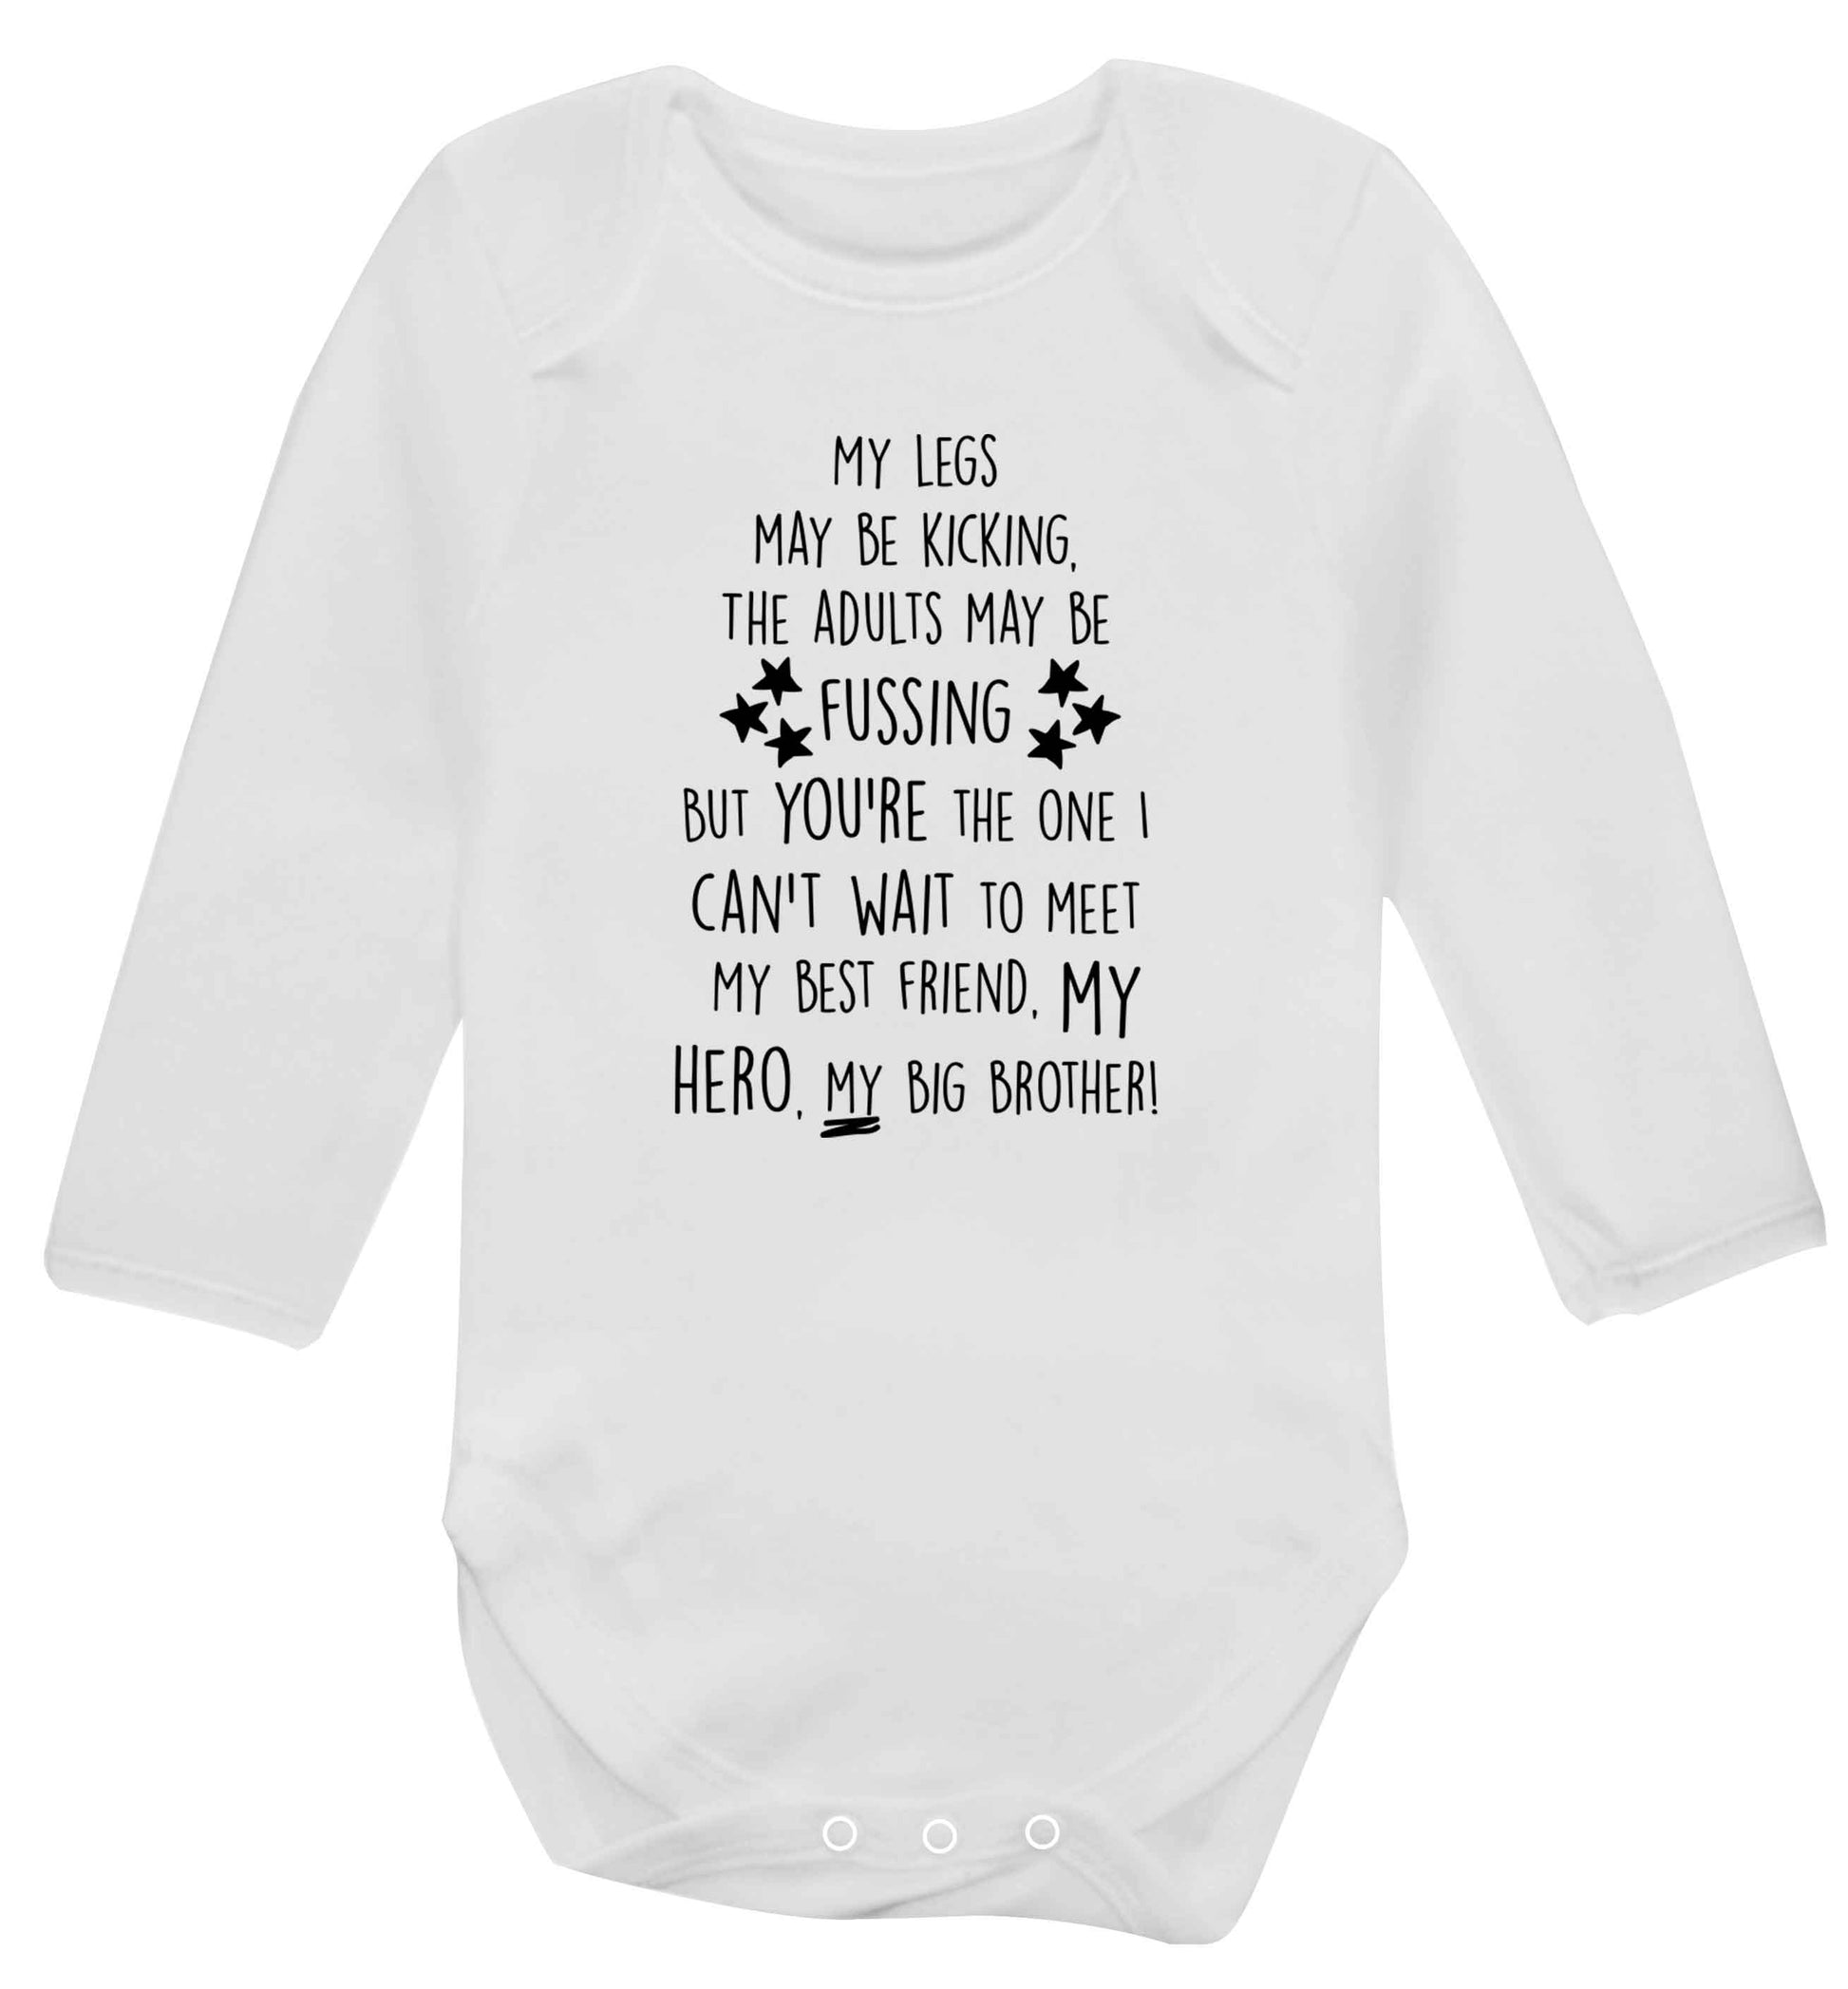 A poem from bump to big brother Baby Vest long sleeved white 6-12 months